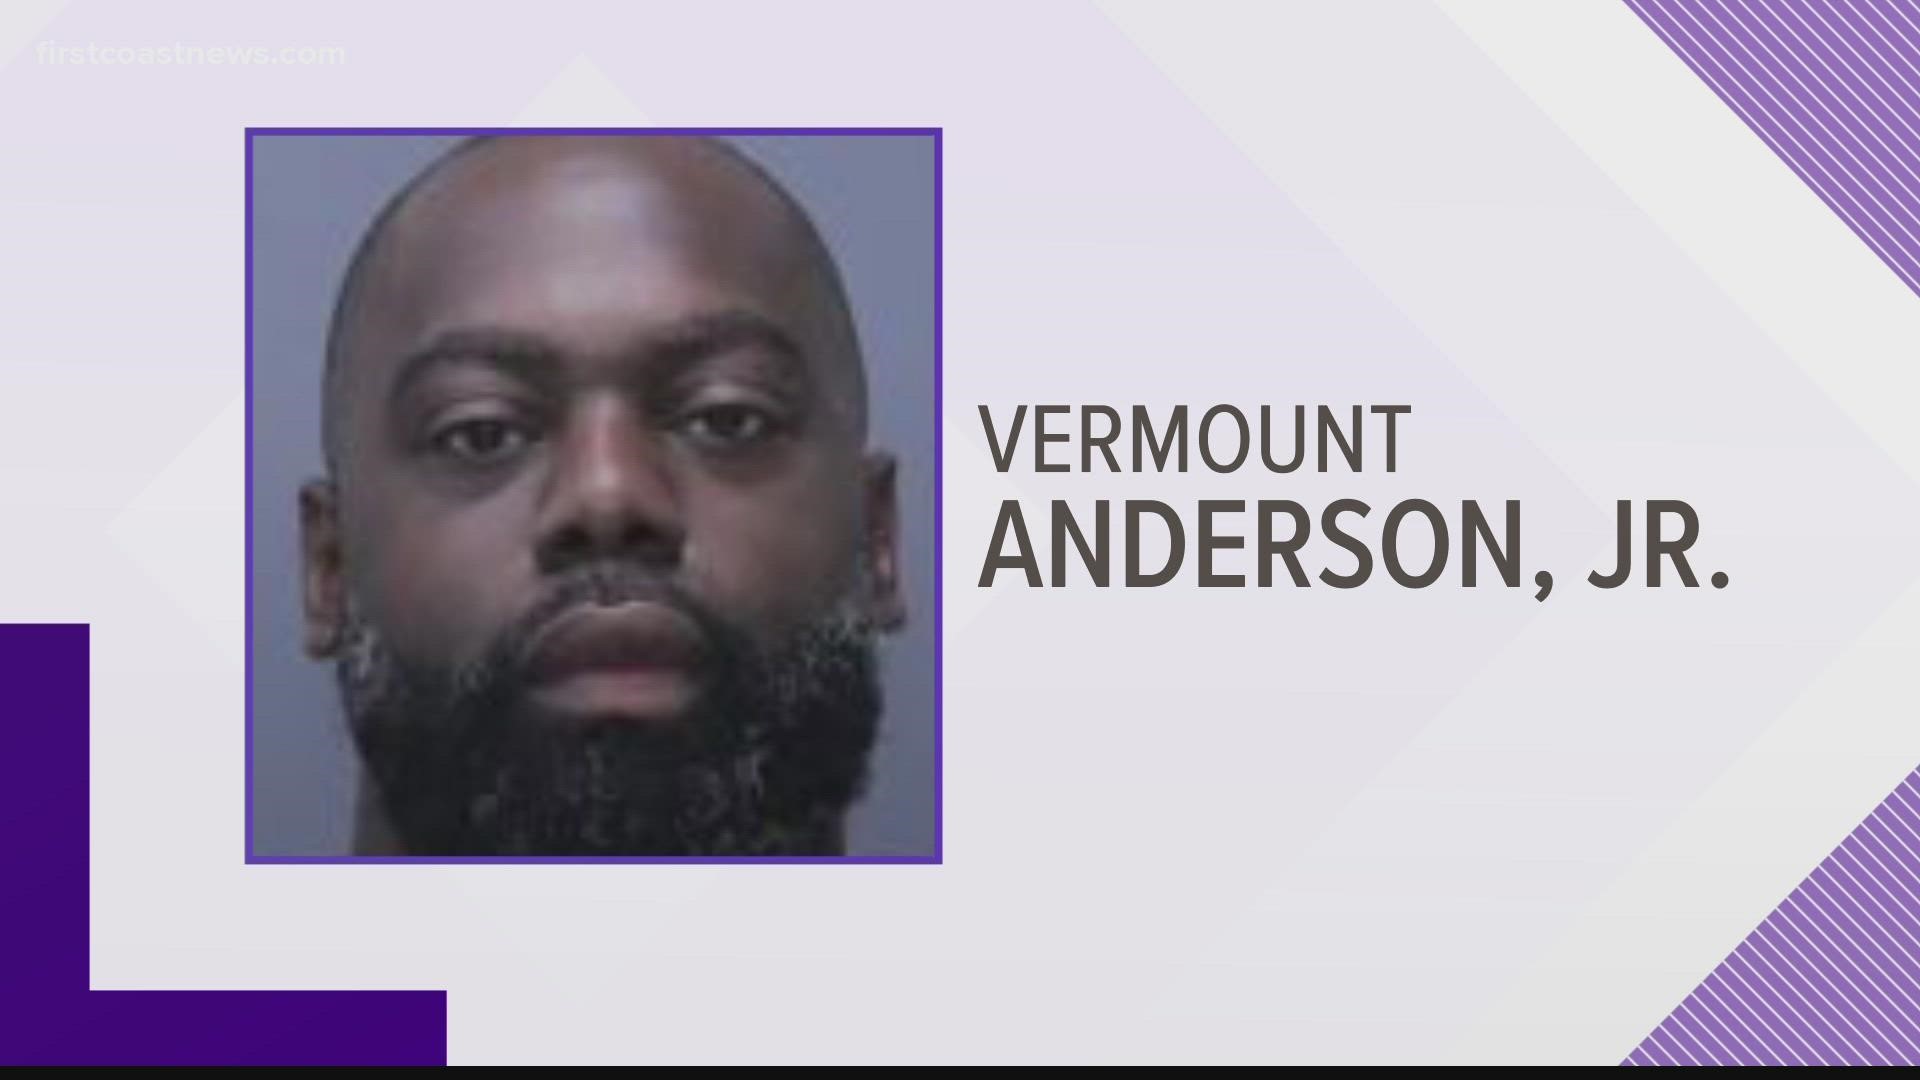 Vermount Anderson produced a handgun sometime during their interaction, pointed it through the open driver side window and shot.